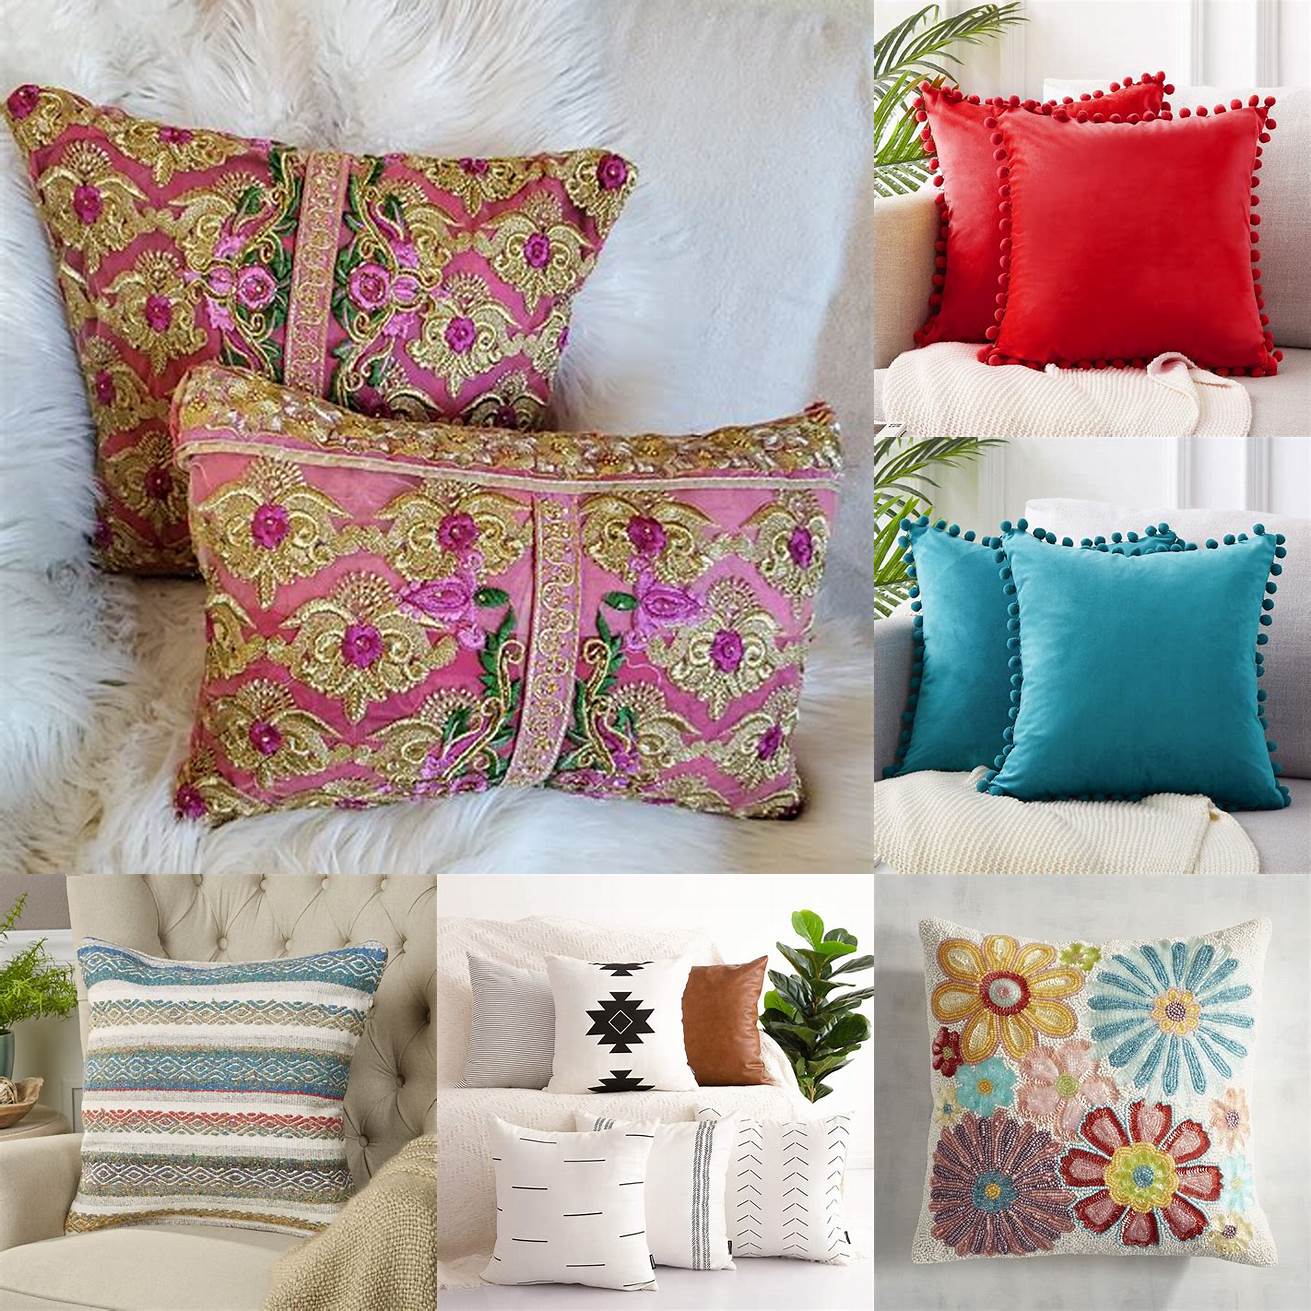 Decorative pillows in various colors and patterns